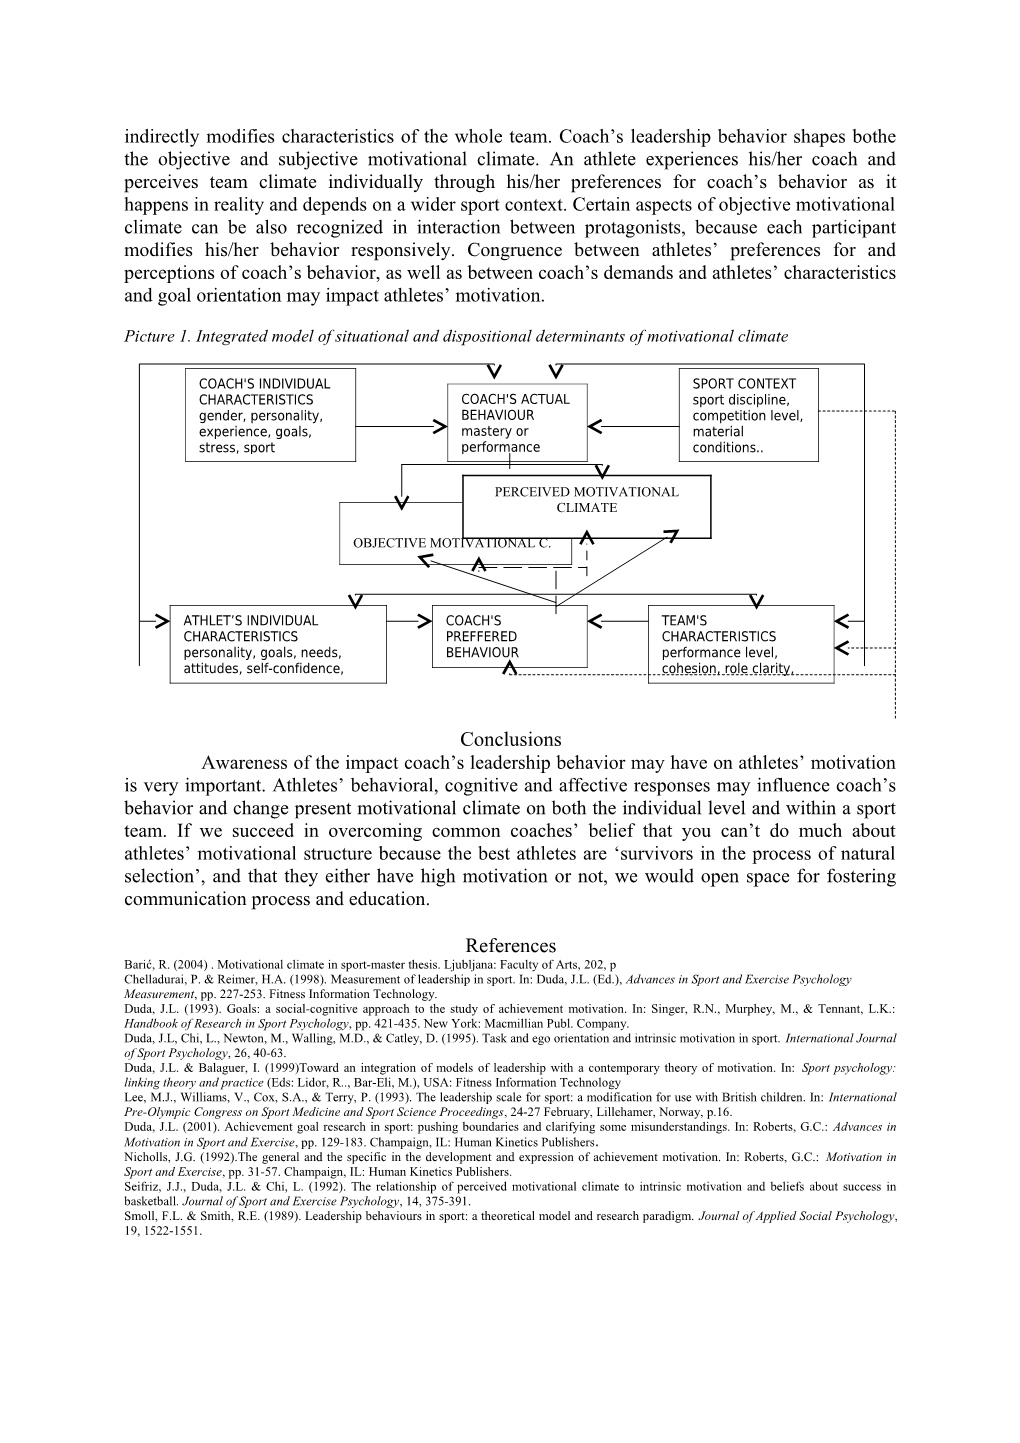 Proposition of Integrated Model of Dispositional and Situational Determinants of Motivation